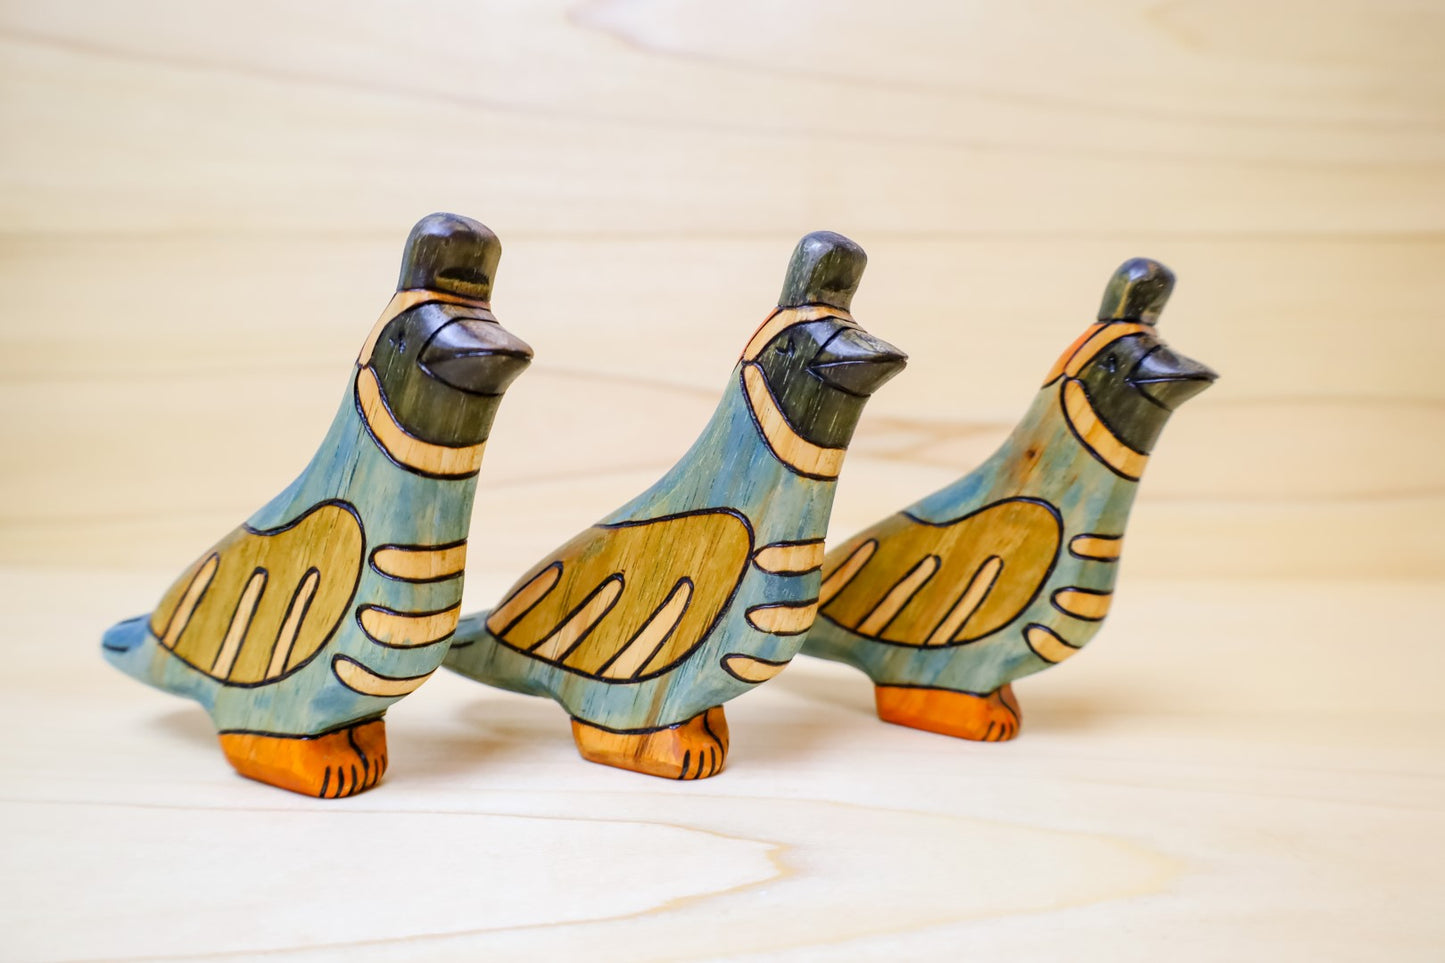 Wooden Quail Toy